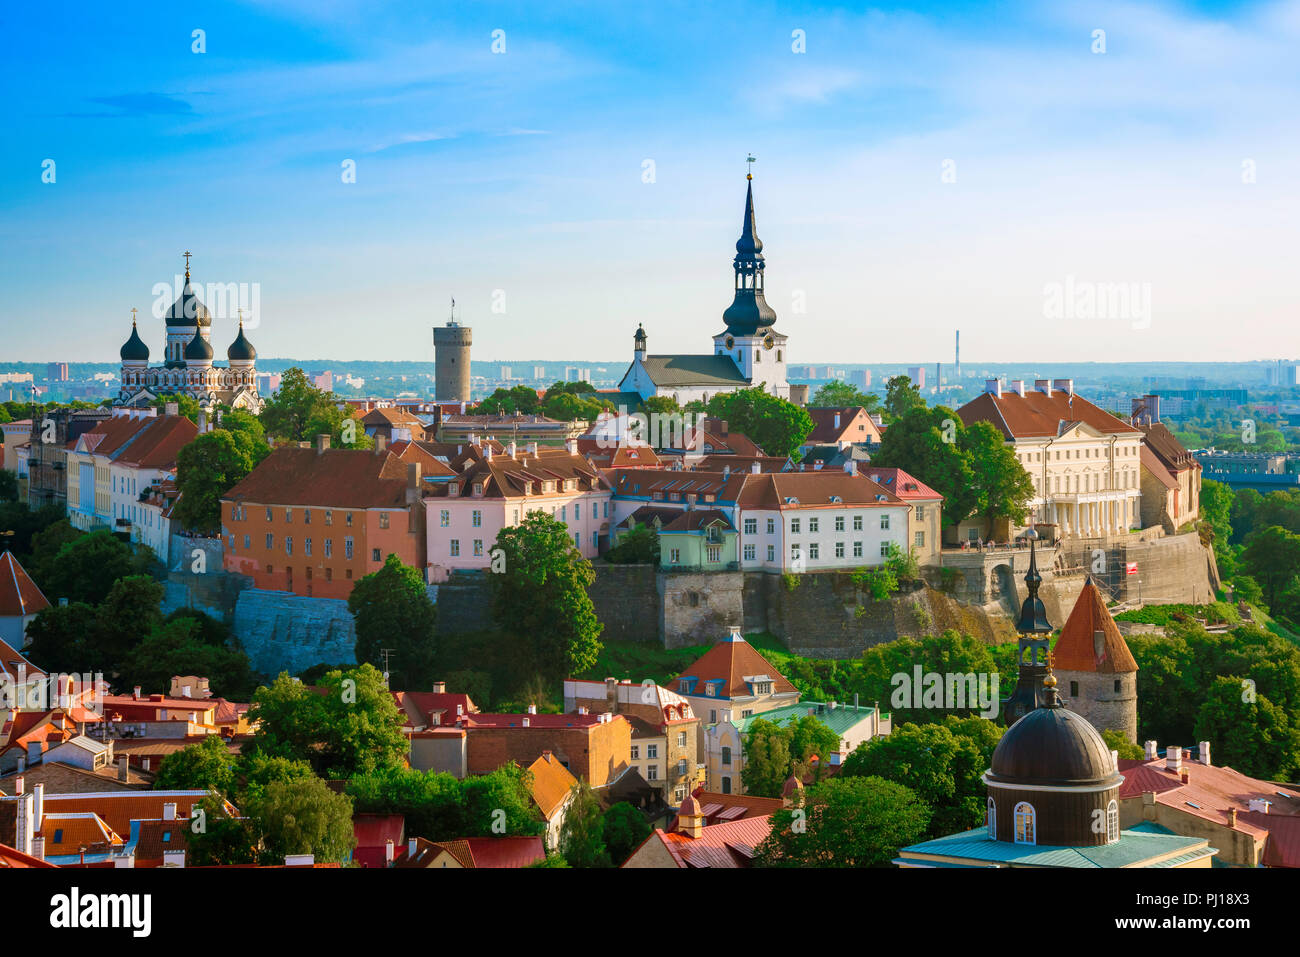 Tallinn old town, view in summer towards the historic old town district of Toompea Hill with its two cathedrals shown on the skyline, Tallinn Estonia Stock Photo